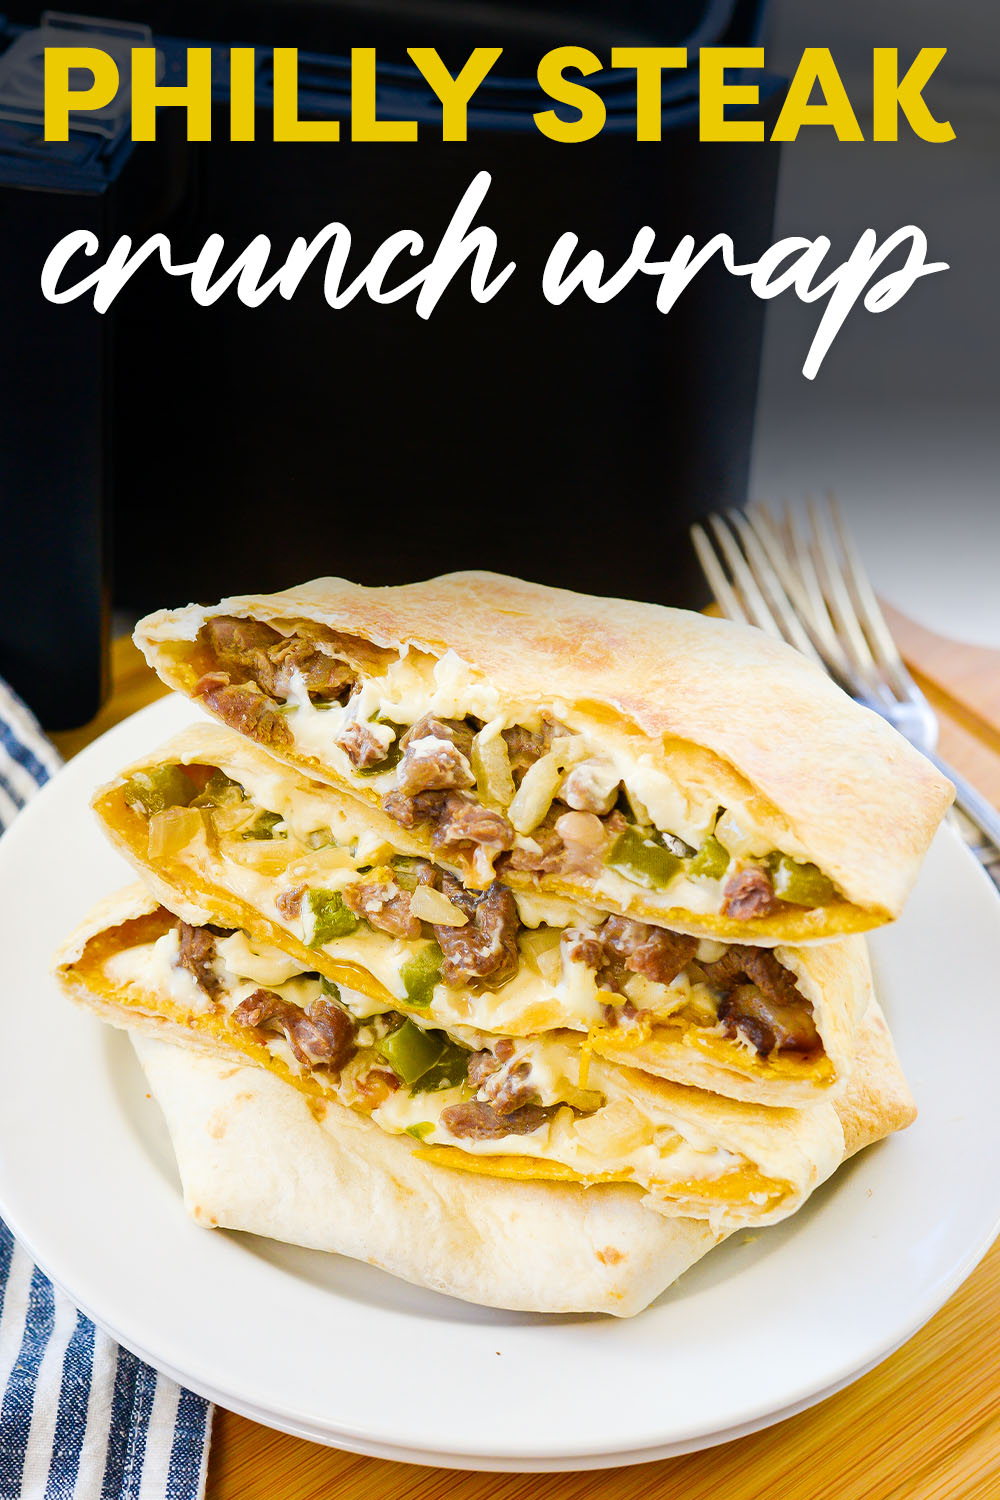 These Philly cheesesteak crunch wraps are made in the air fryer!  This keeps the recipe simple, and the taste amazing!